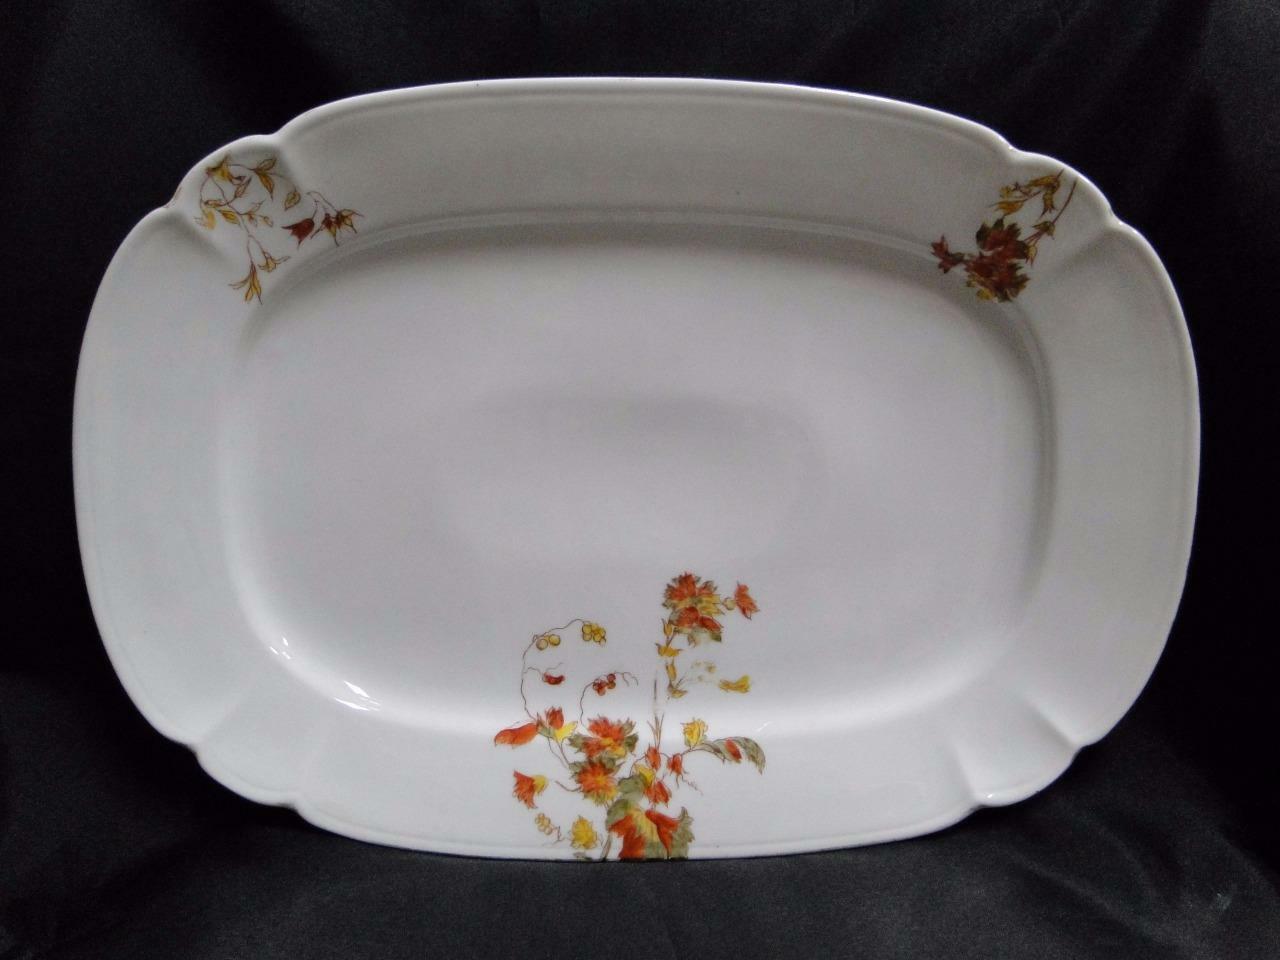 Schwalb Brothers (BSM), Coral Flowers: Oval Serving Platter, 14 7/8" x 10 1/2"